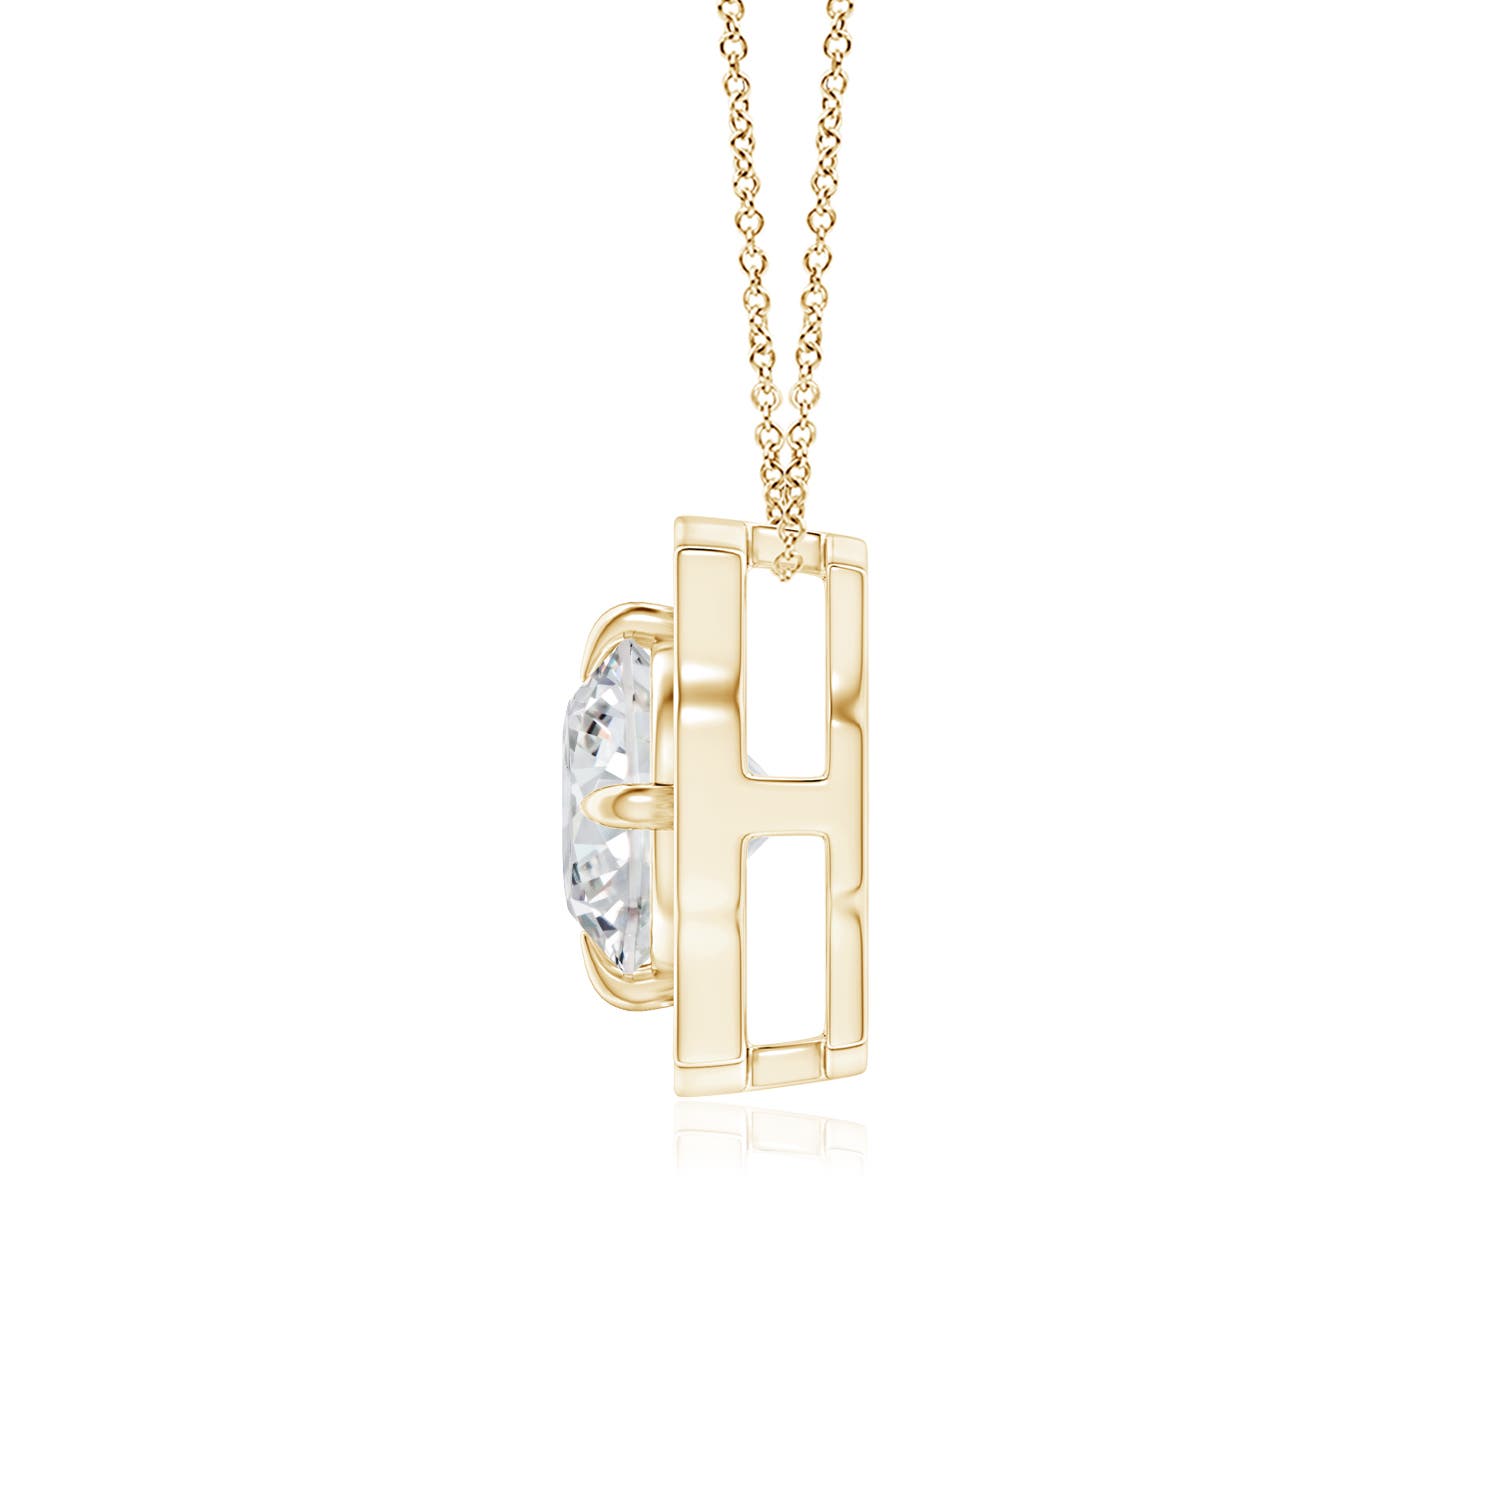 H, SI2 / 0.62 CT / 14 KT Yellow Gold